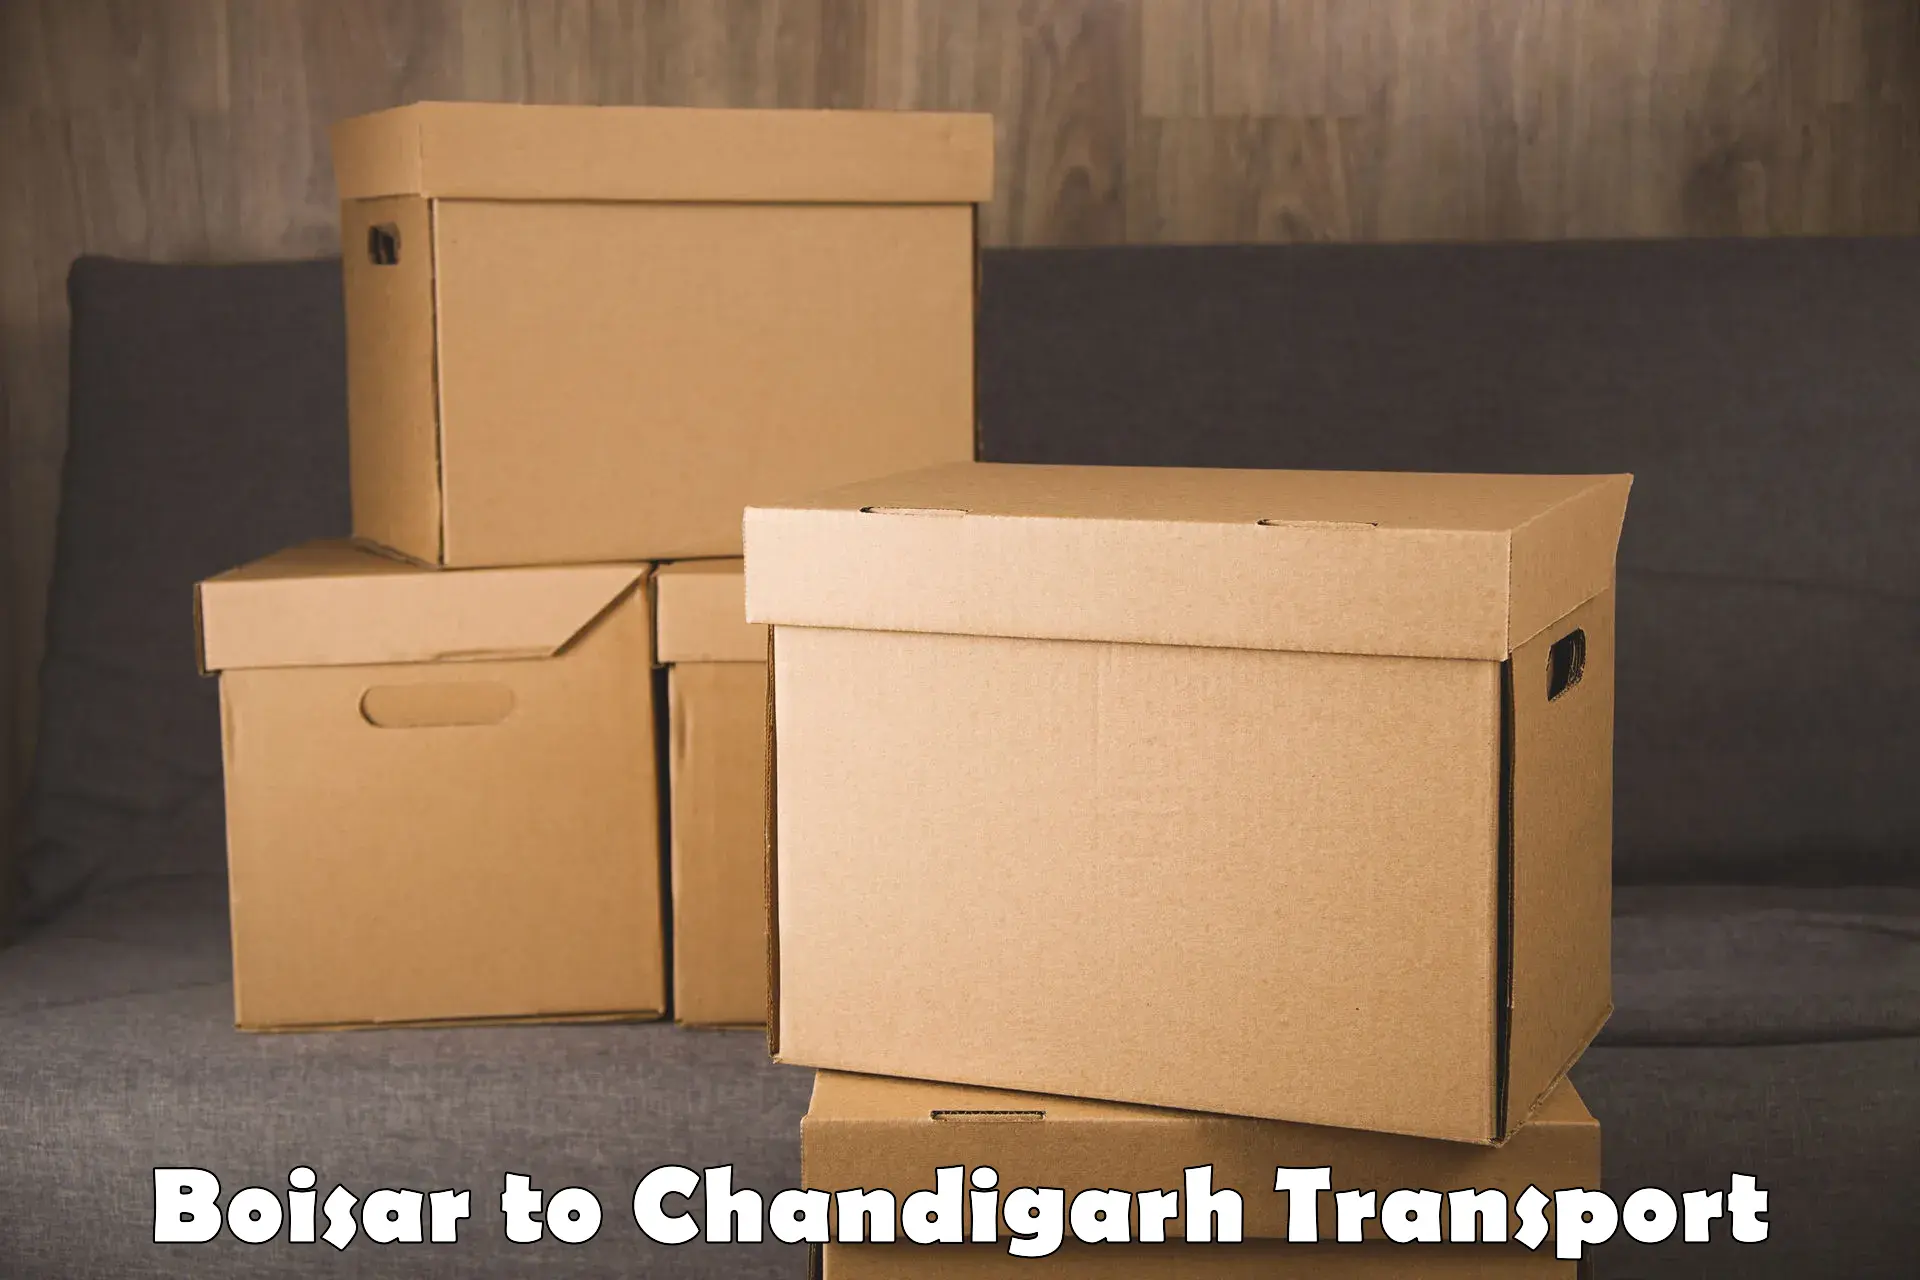 Truck transport companies in India Boisar to Chandigarh